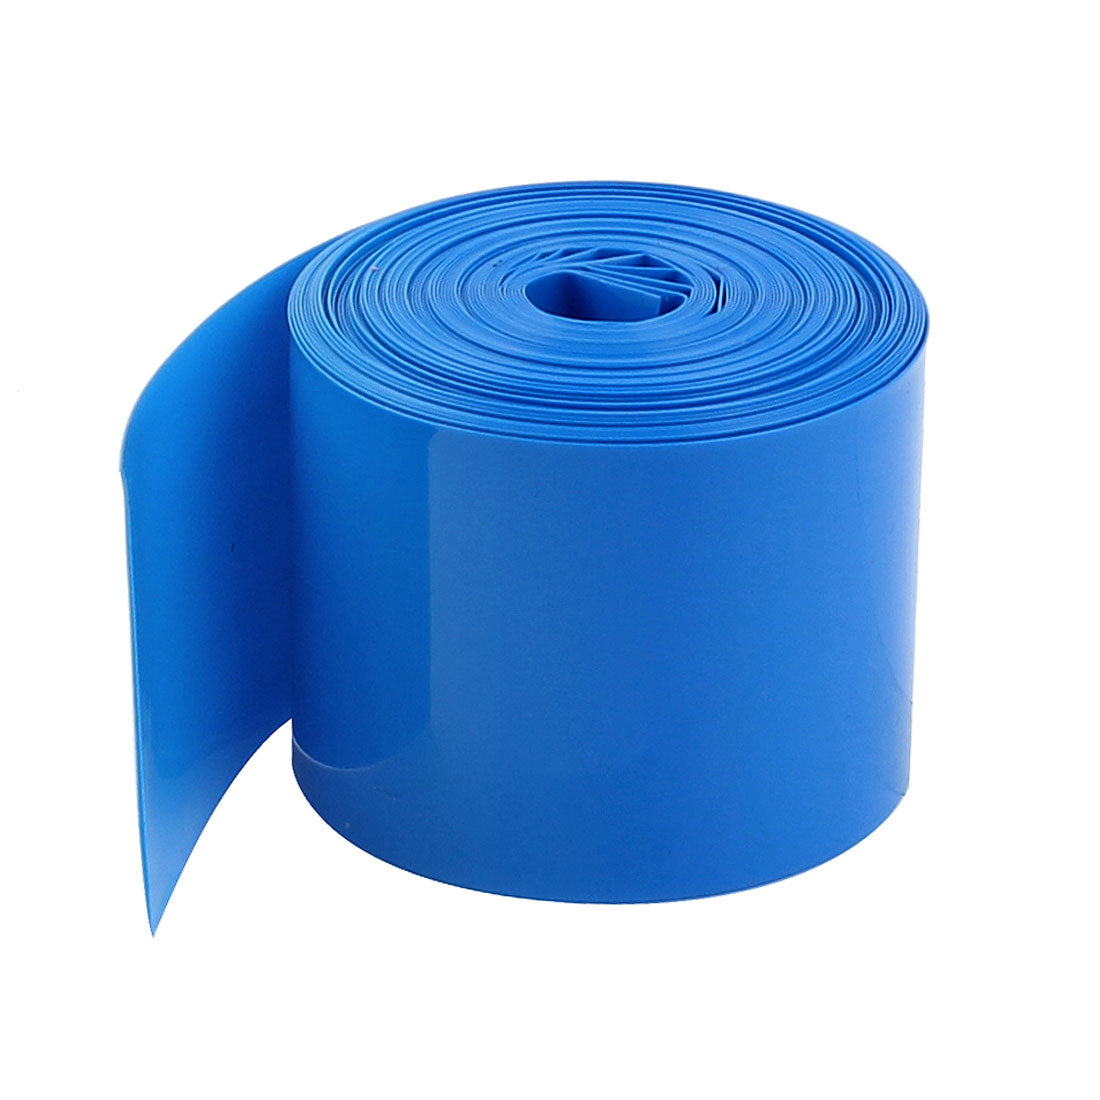 uxcell Uxcell 5Meters 29.5mm Width PVC Heat Shrink Wrap Tube Blue for 1 x 18650 Battery